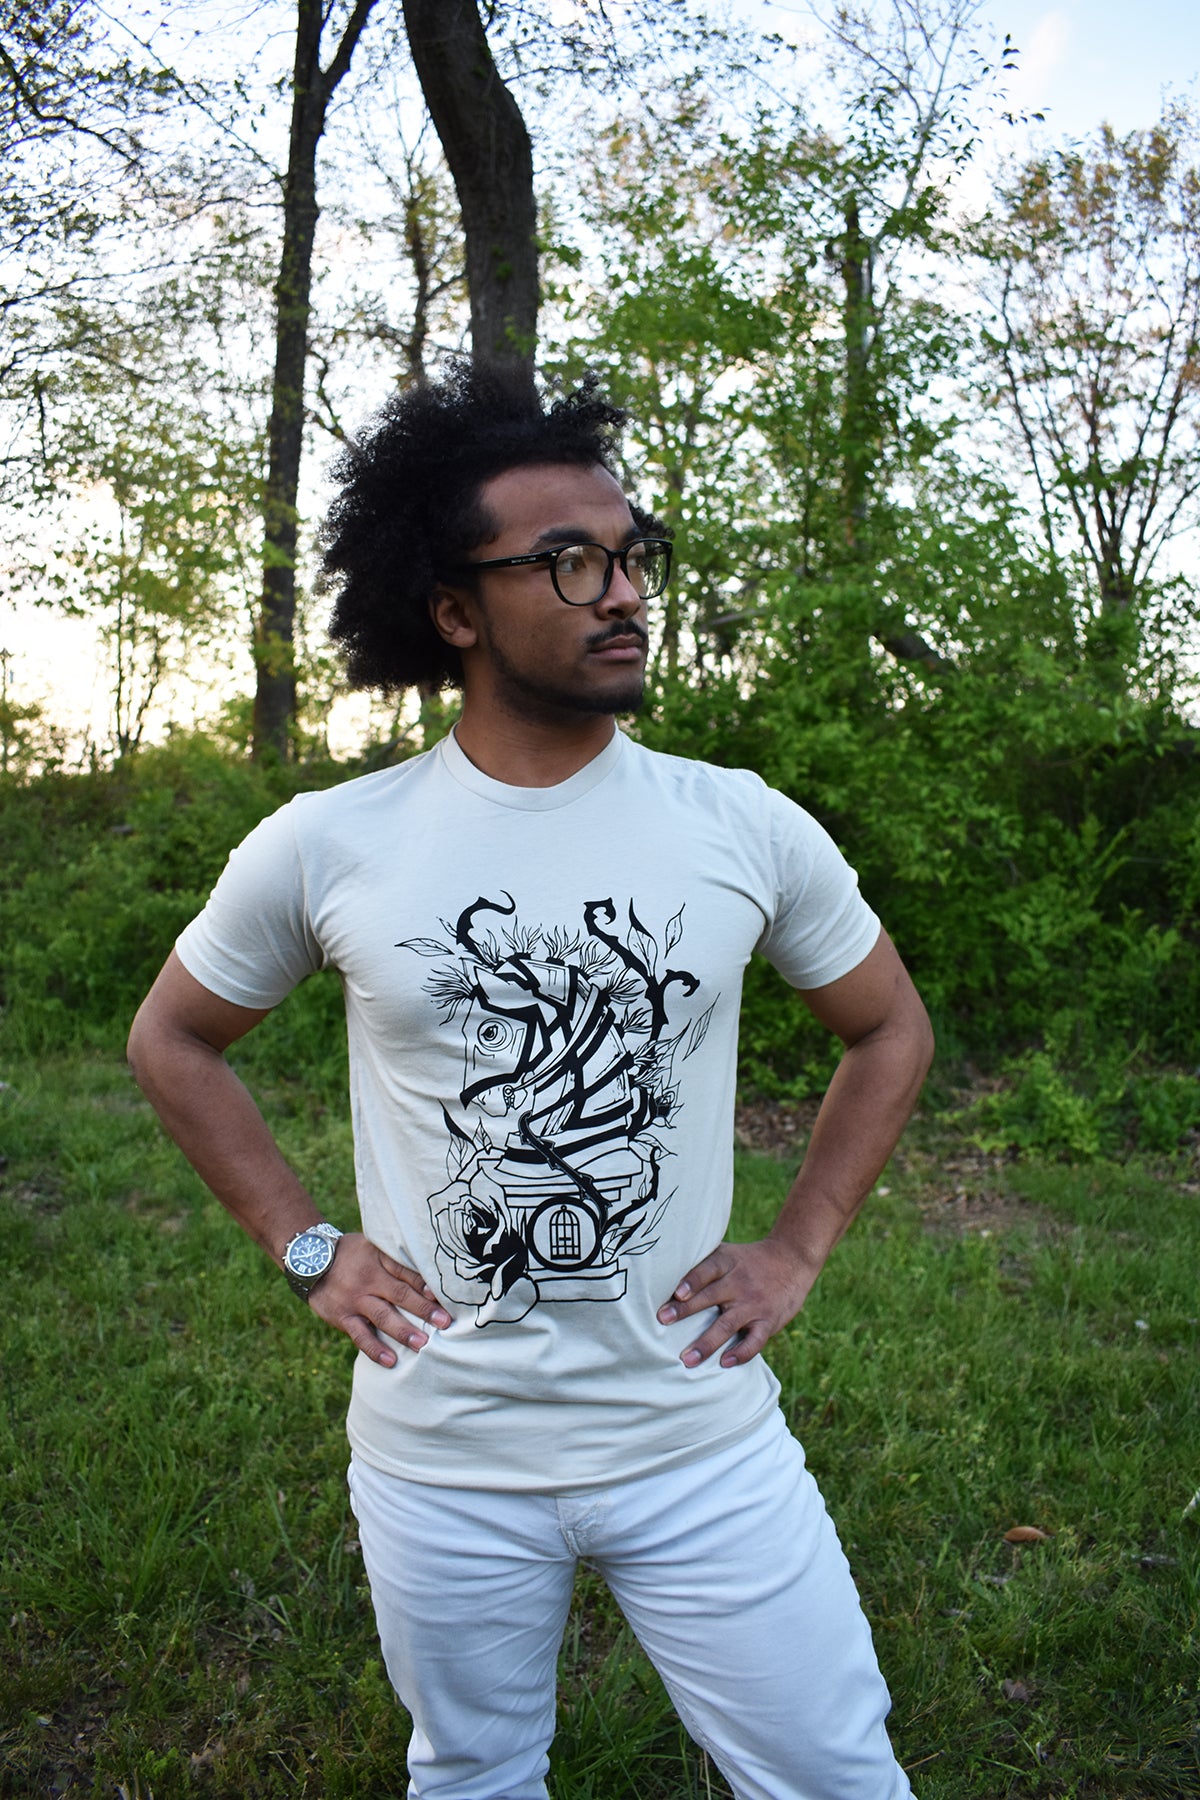 Male model wearing a cream colored t-shirt with Cameron McKnight's Knight design in black on the front.